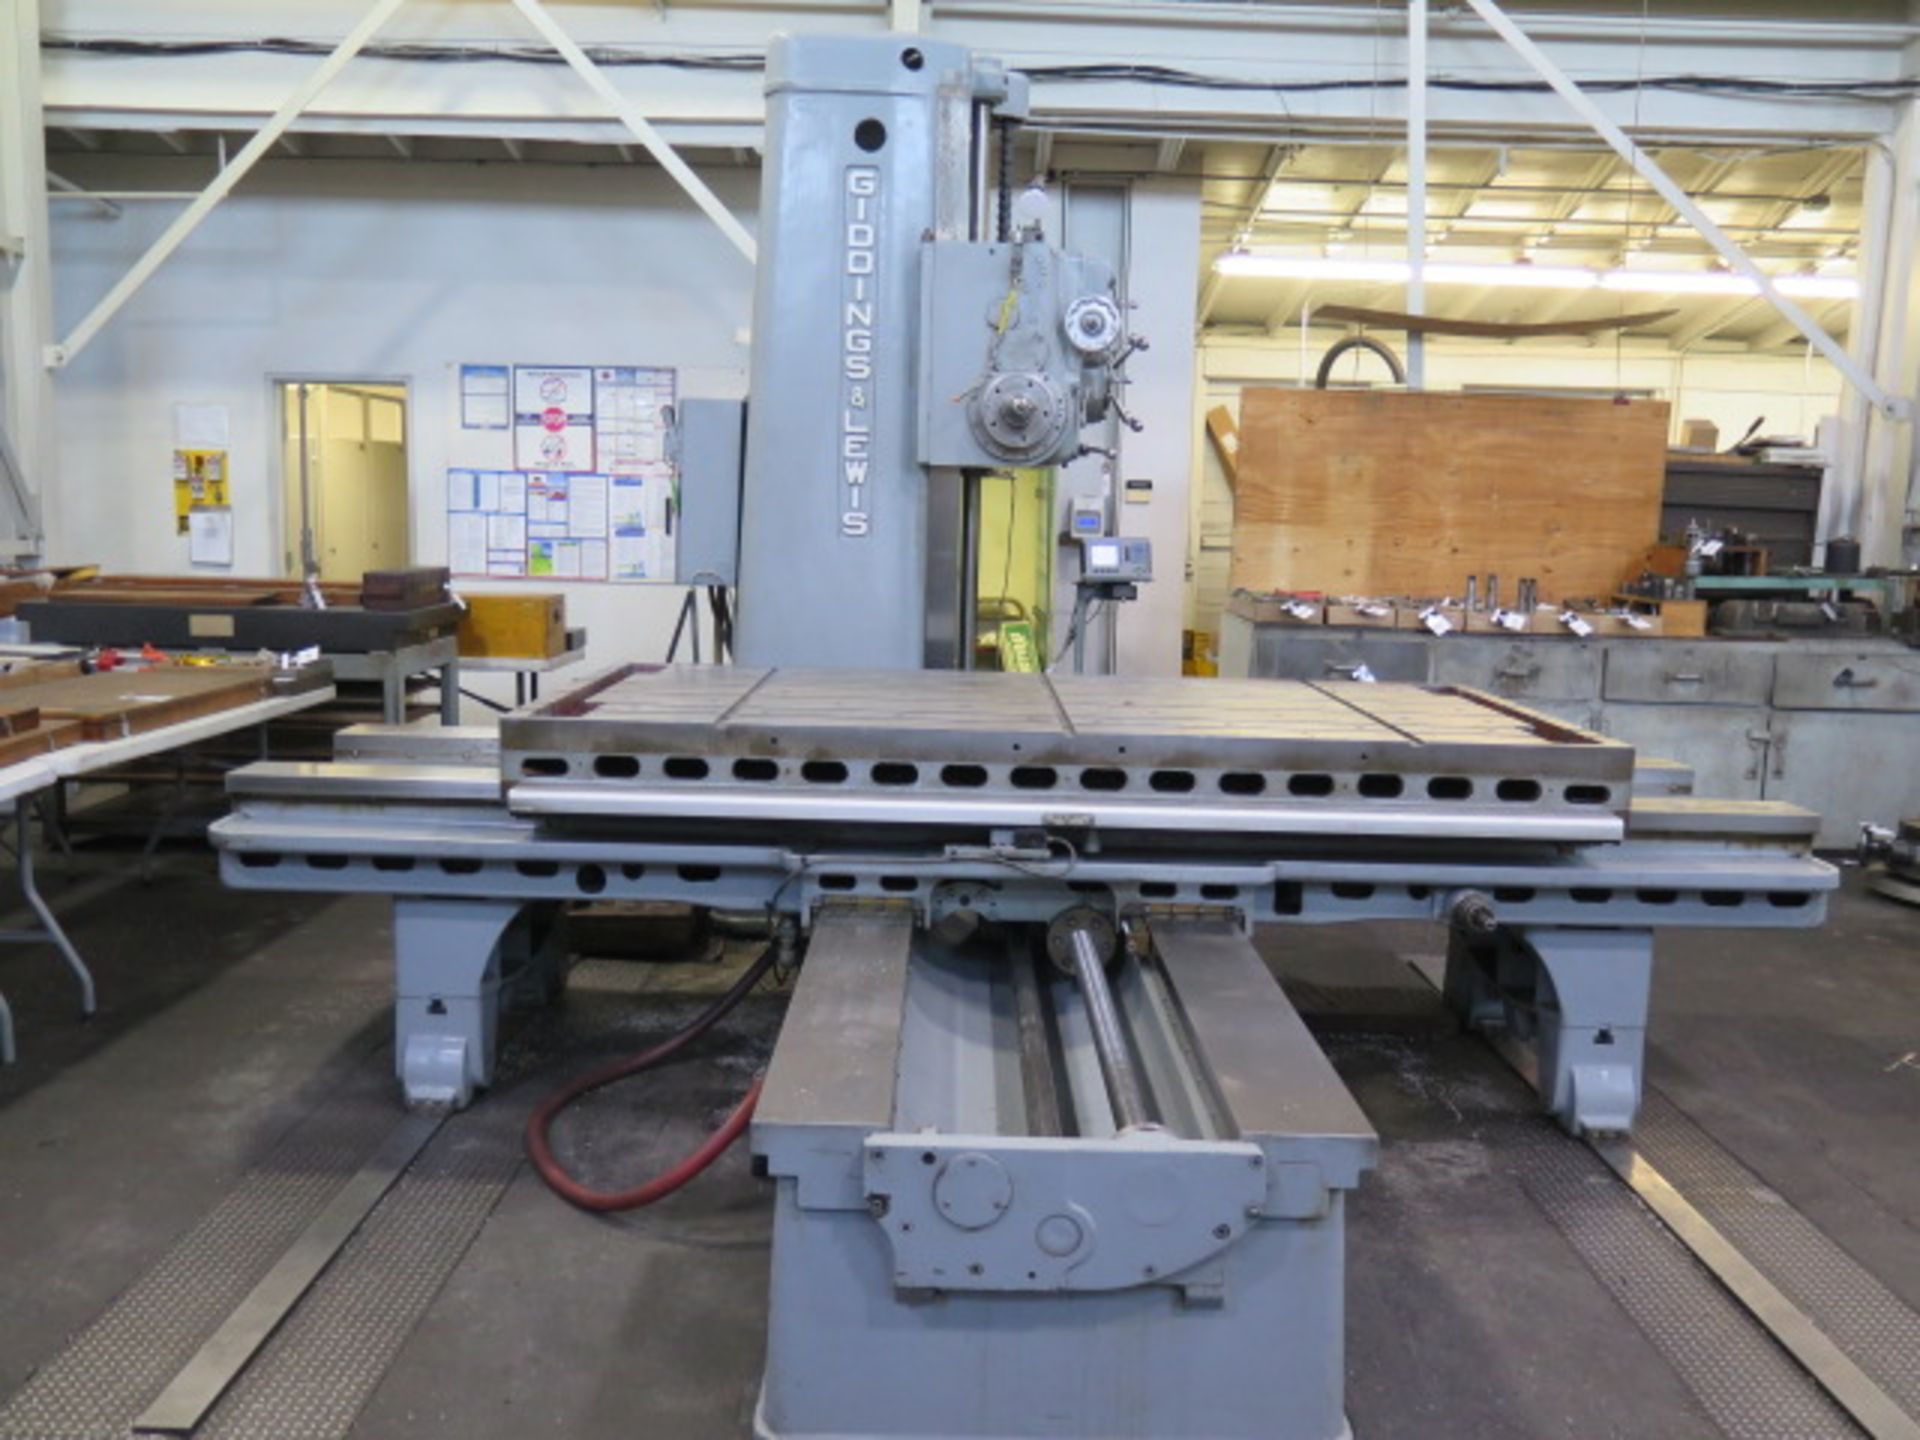 Giddings & Lewis 340-T Horizontal Boring Mill w/ Acu-Rite 4-Axis DRO, 4” Spindle, SOLD AS IS - Image 2 of 16